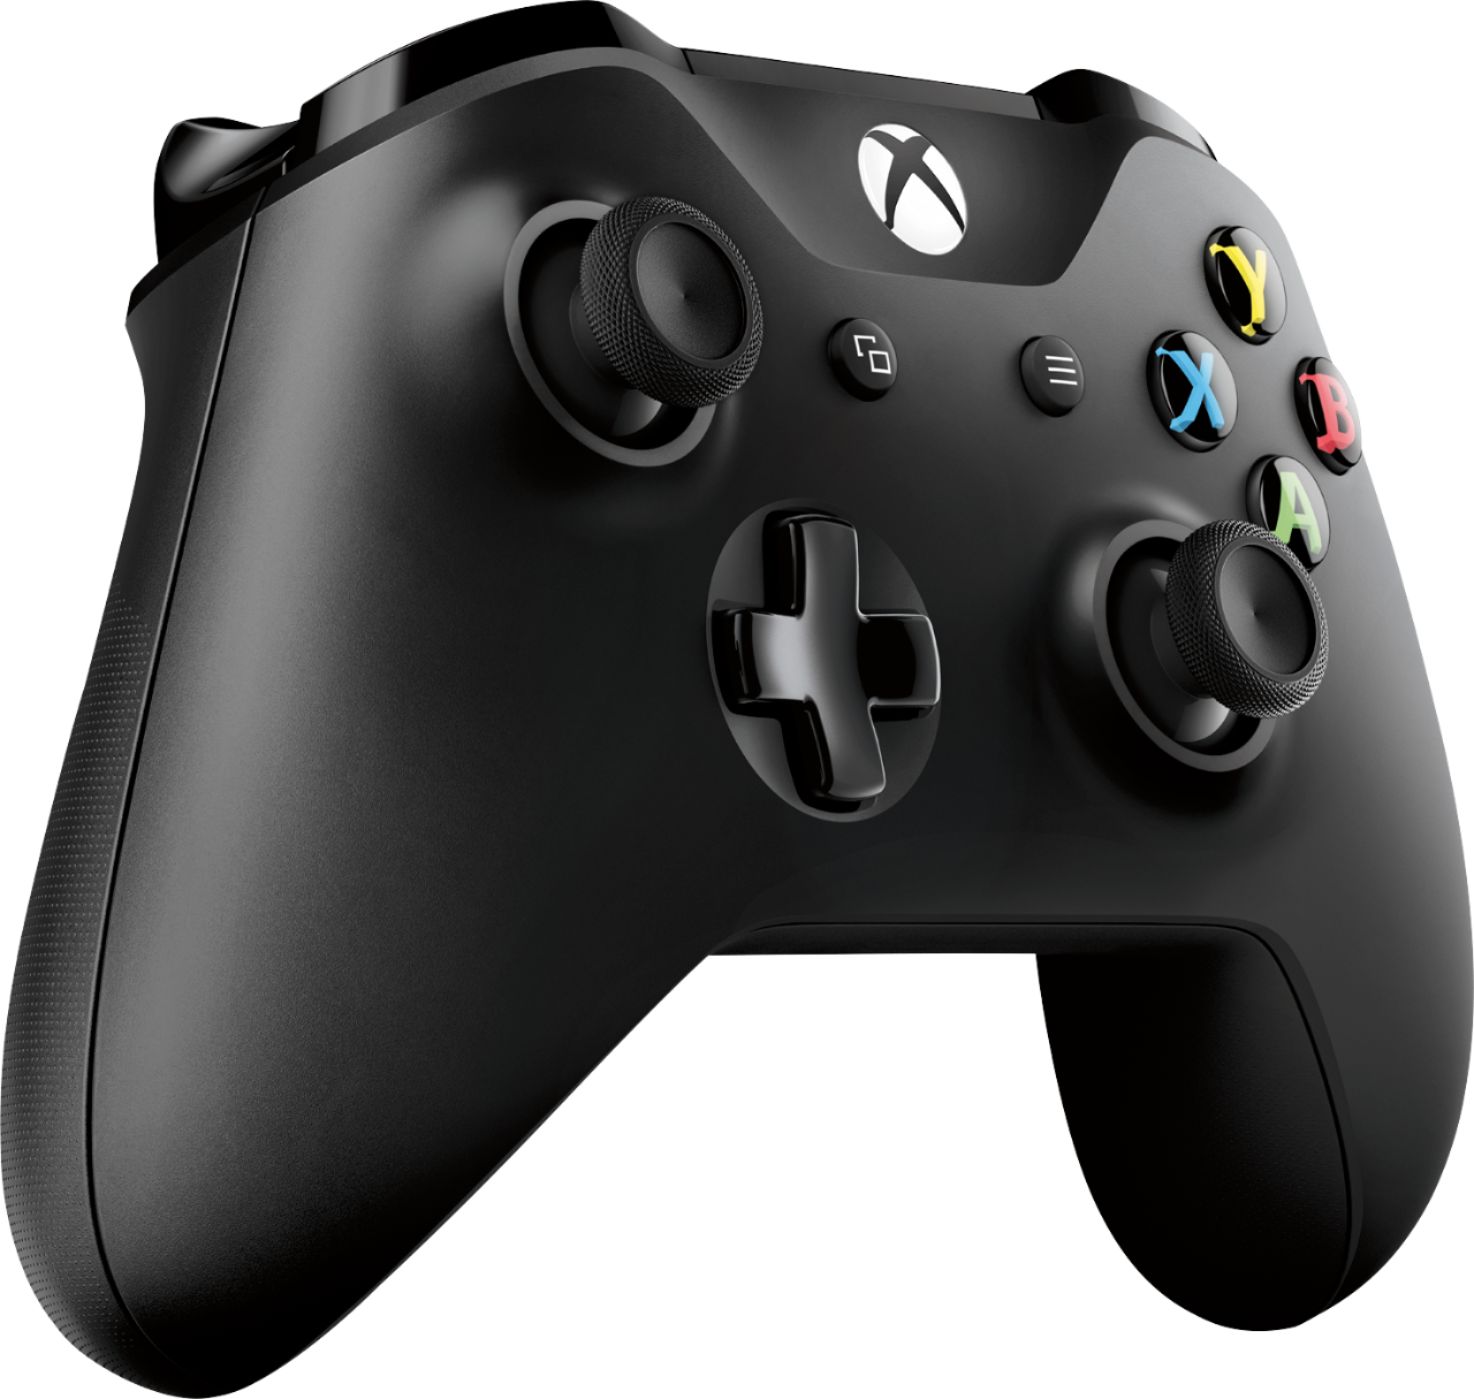 Angle View: Microsoft - Geek Squad Certified Refurbished Wireless Controller for Xbox One and Windows 10 - Black